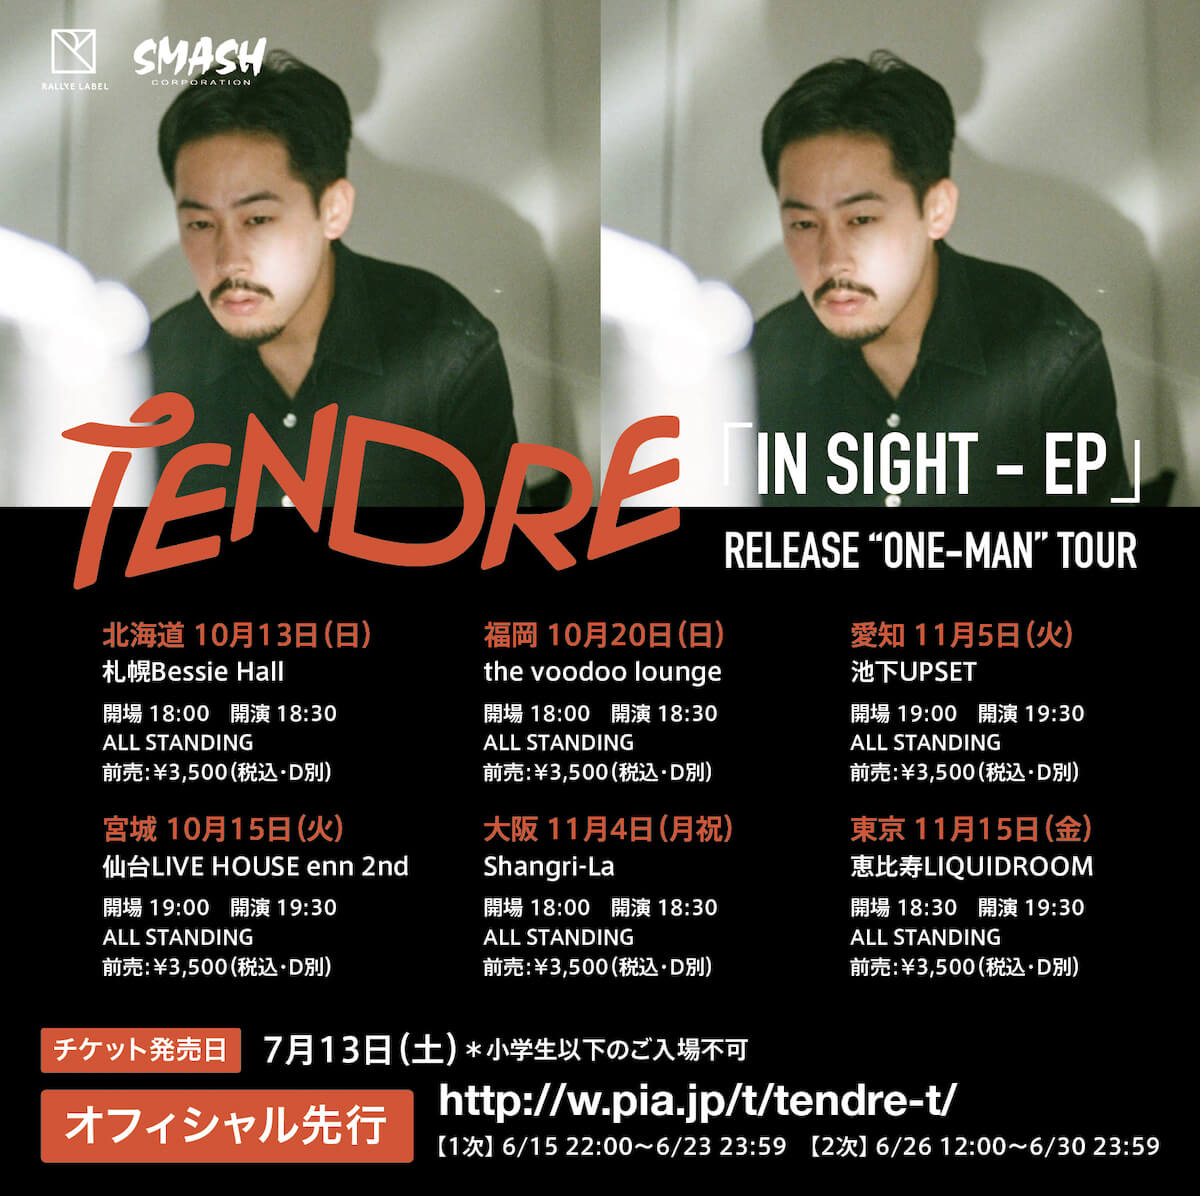 TENDRE、10月2日発売の『IN SIGHT ー EP』のリリースツアーが決定！ music190616_tendre_1